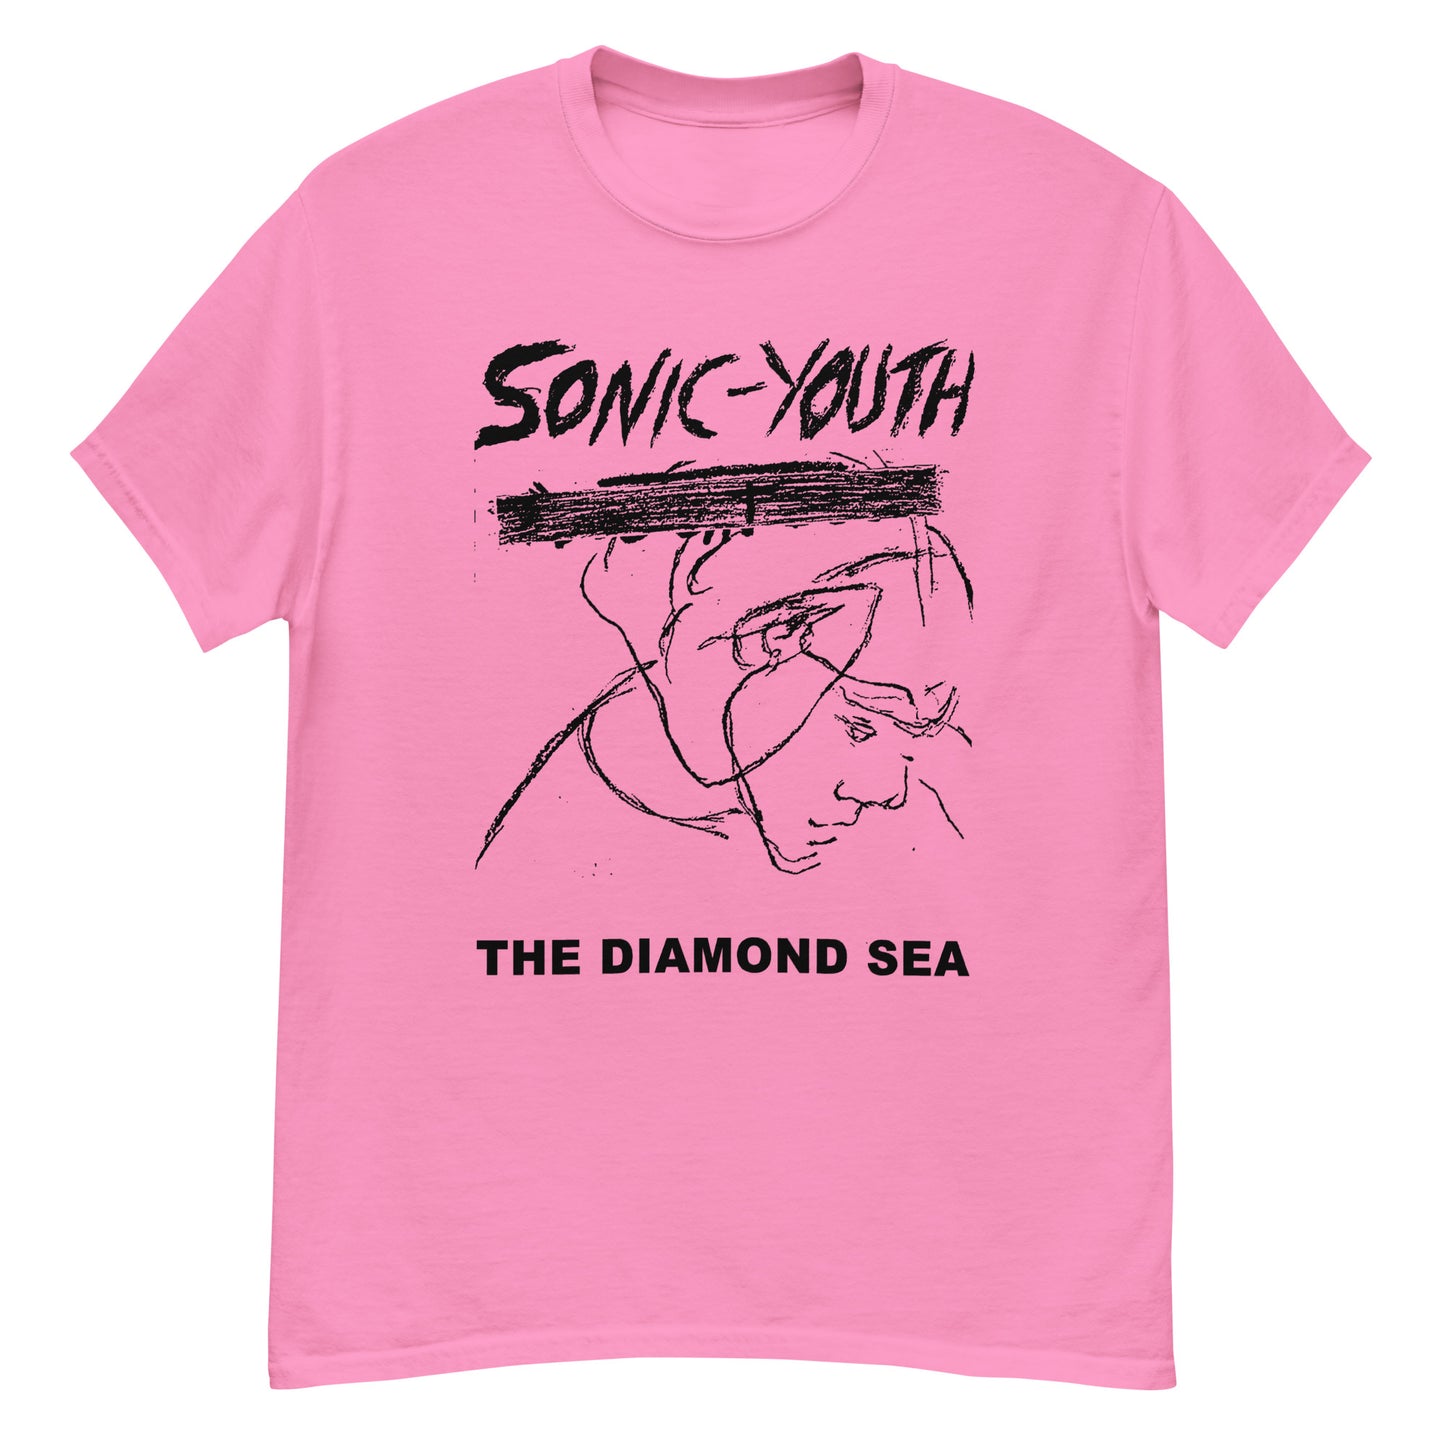 Sonic Youth "The Diamond Sea" T-Shirt (3 color options)